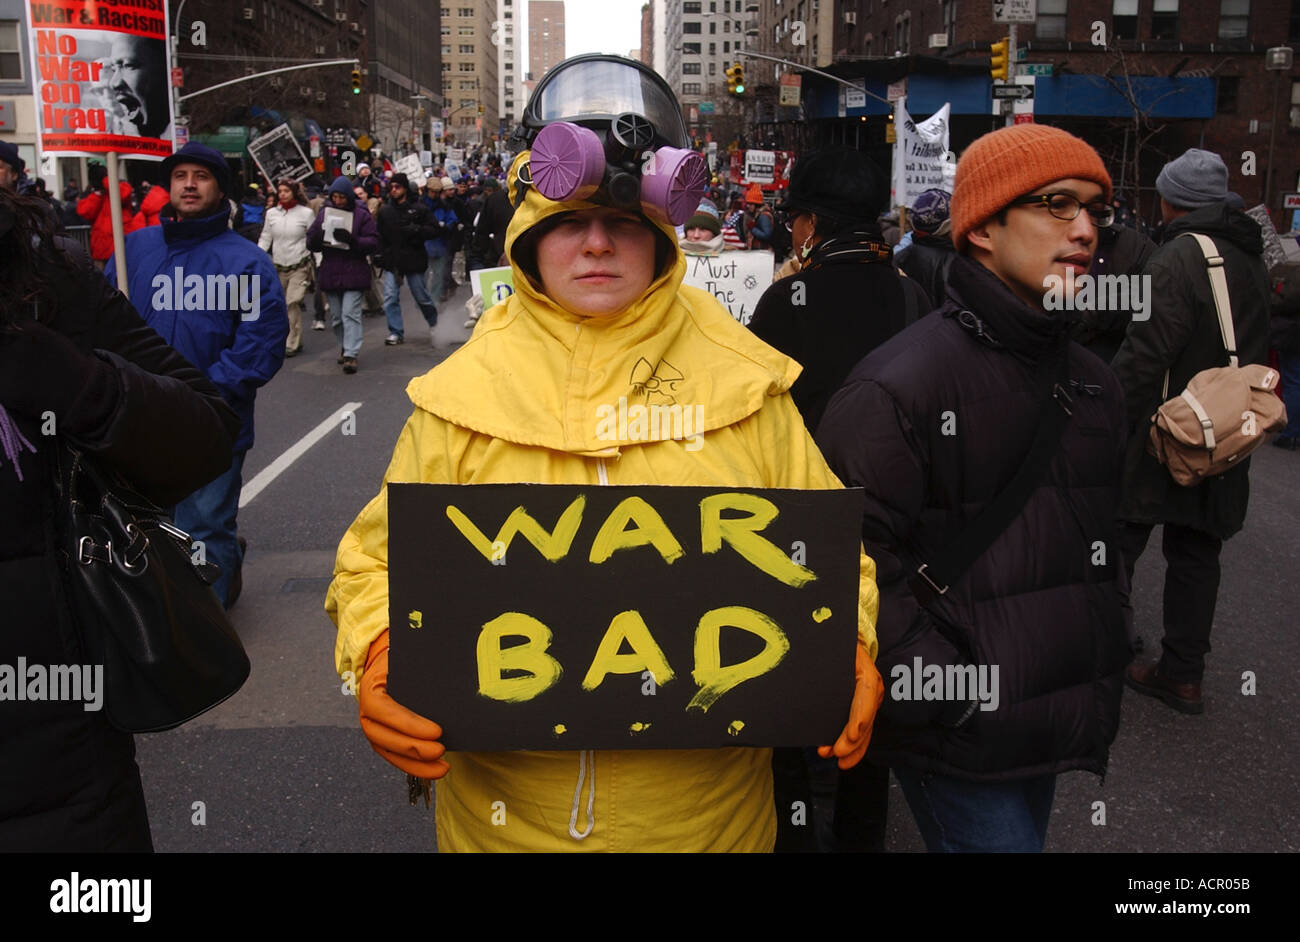 Protester sign WAR BAD during NYC War protest protesting United States and Iraq war in New York city massive protest Stock Photo